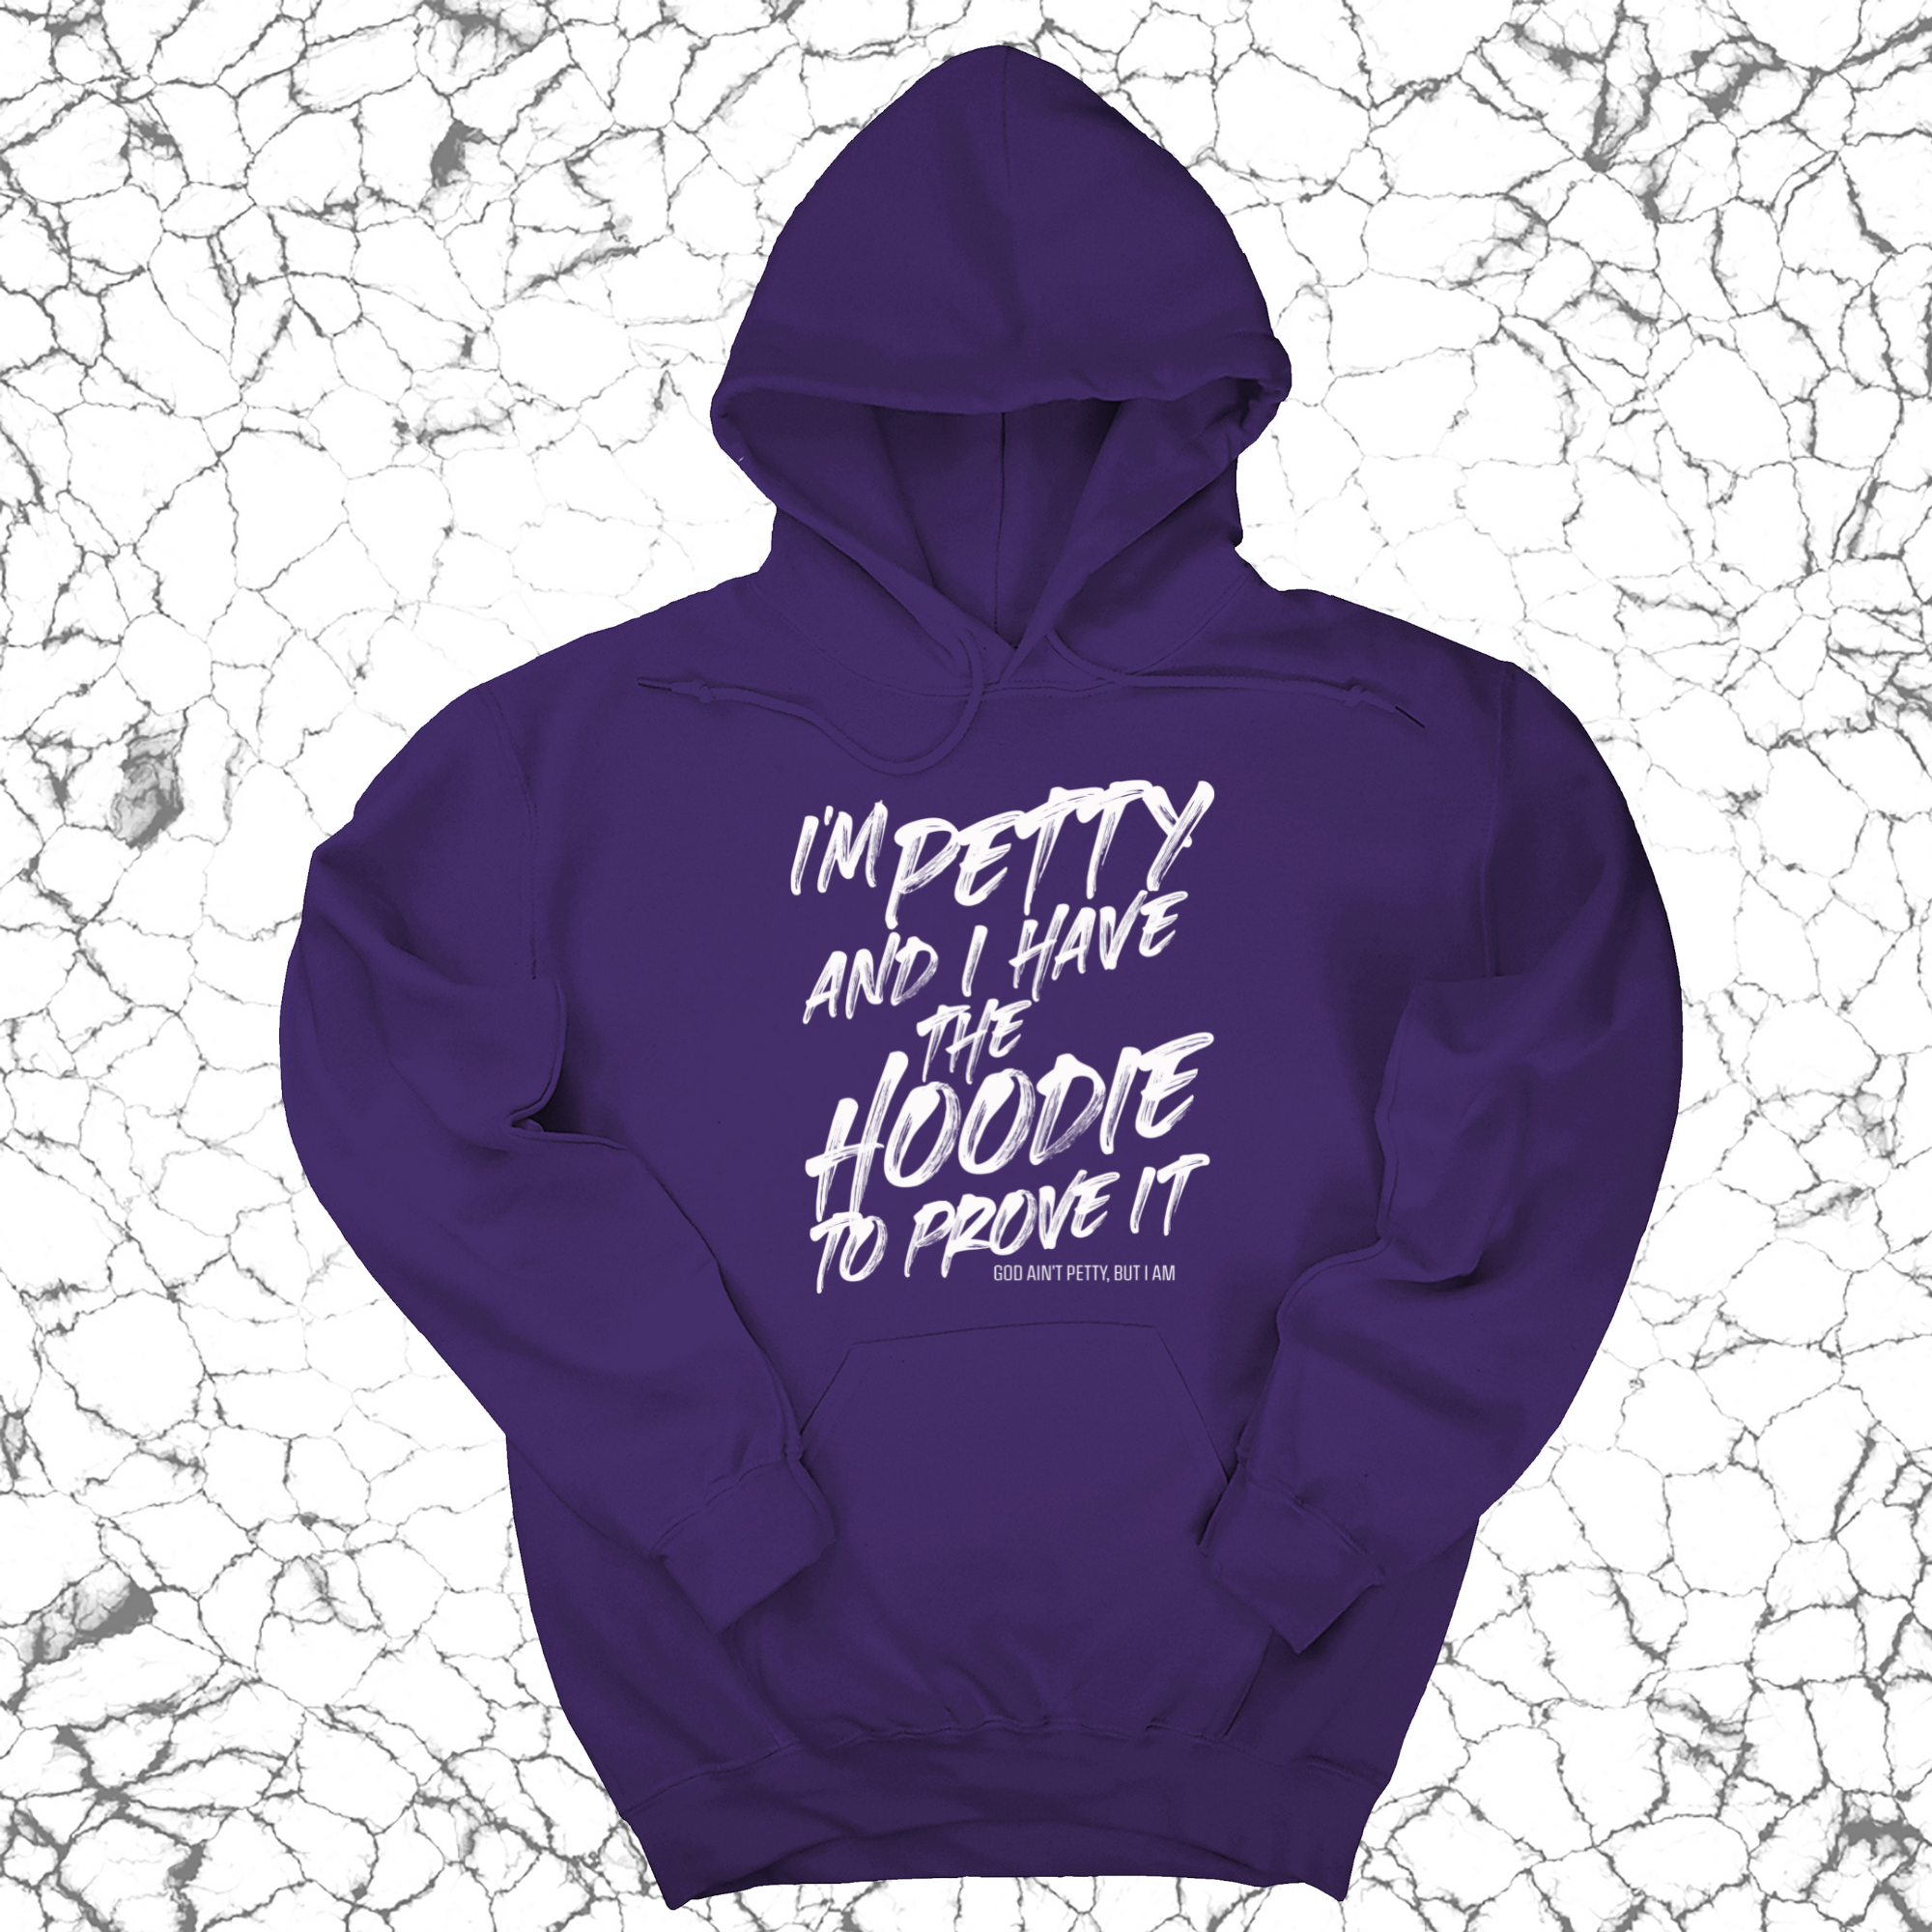 I'm petty and I have the hoodie to prove it Unisex Hoodie-Hoodie-The Original God Ain't Petty But I Am